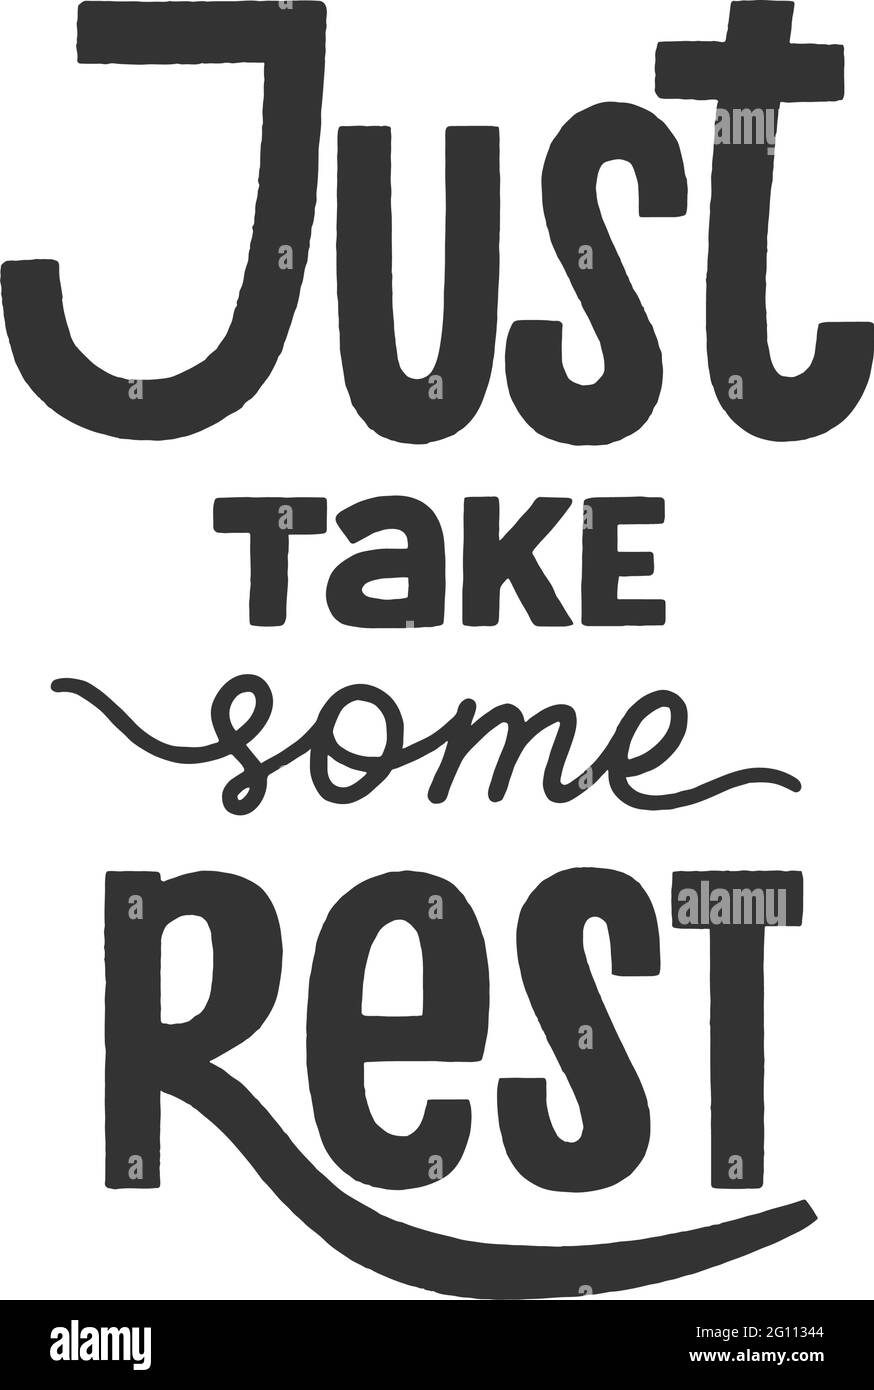 Just take some rest phrase, recreation and relaxation quote for holidays, weekend and vacation. Hand-drawn lettering sign for prints, posters, banner, Stock Vector